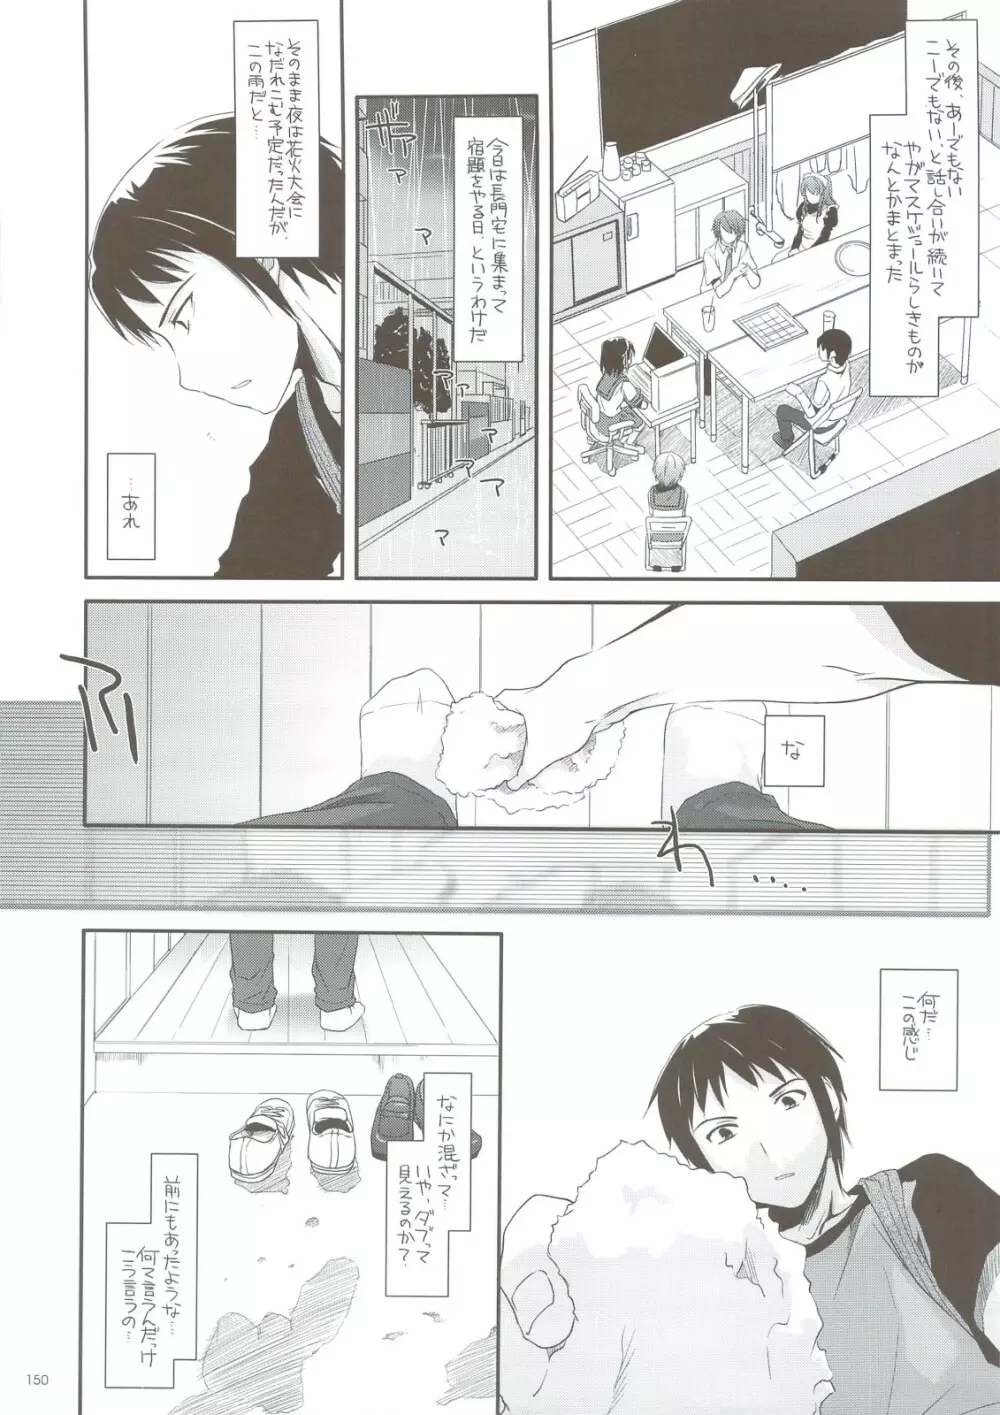 DL-SOS 総集編 - page149